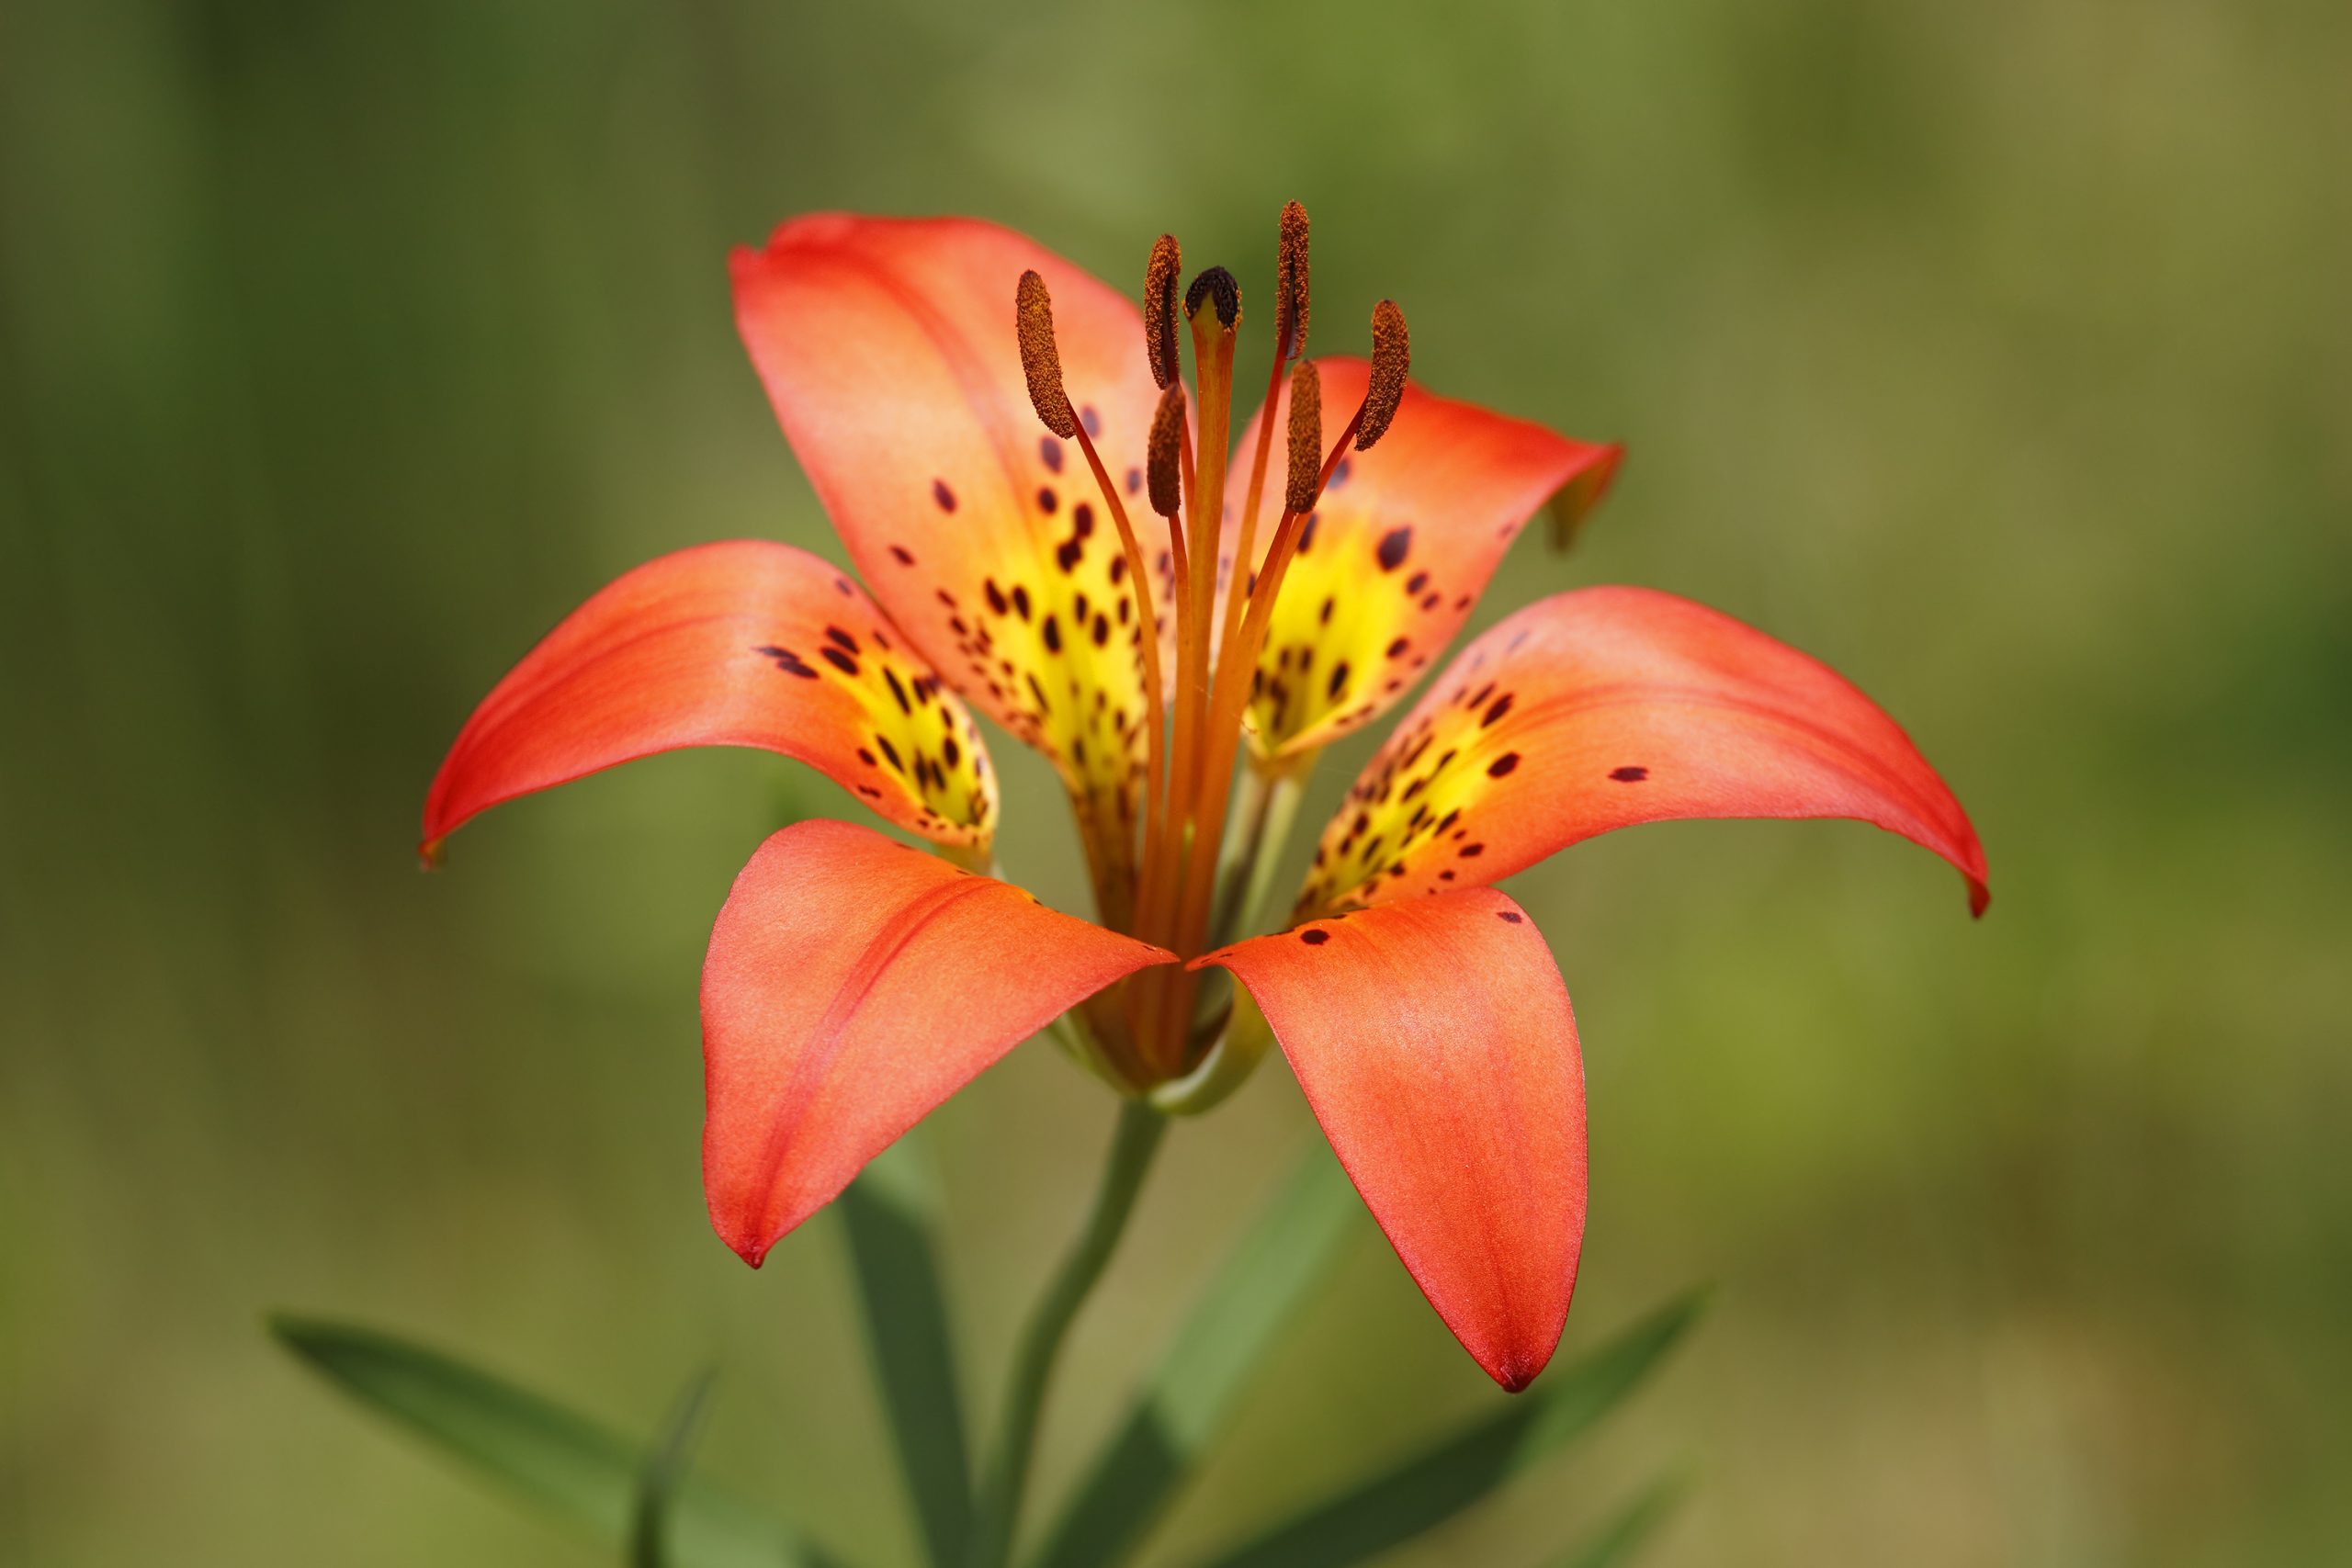 Red Lily Photo